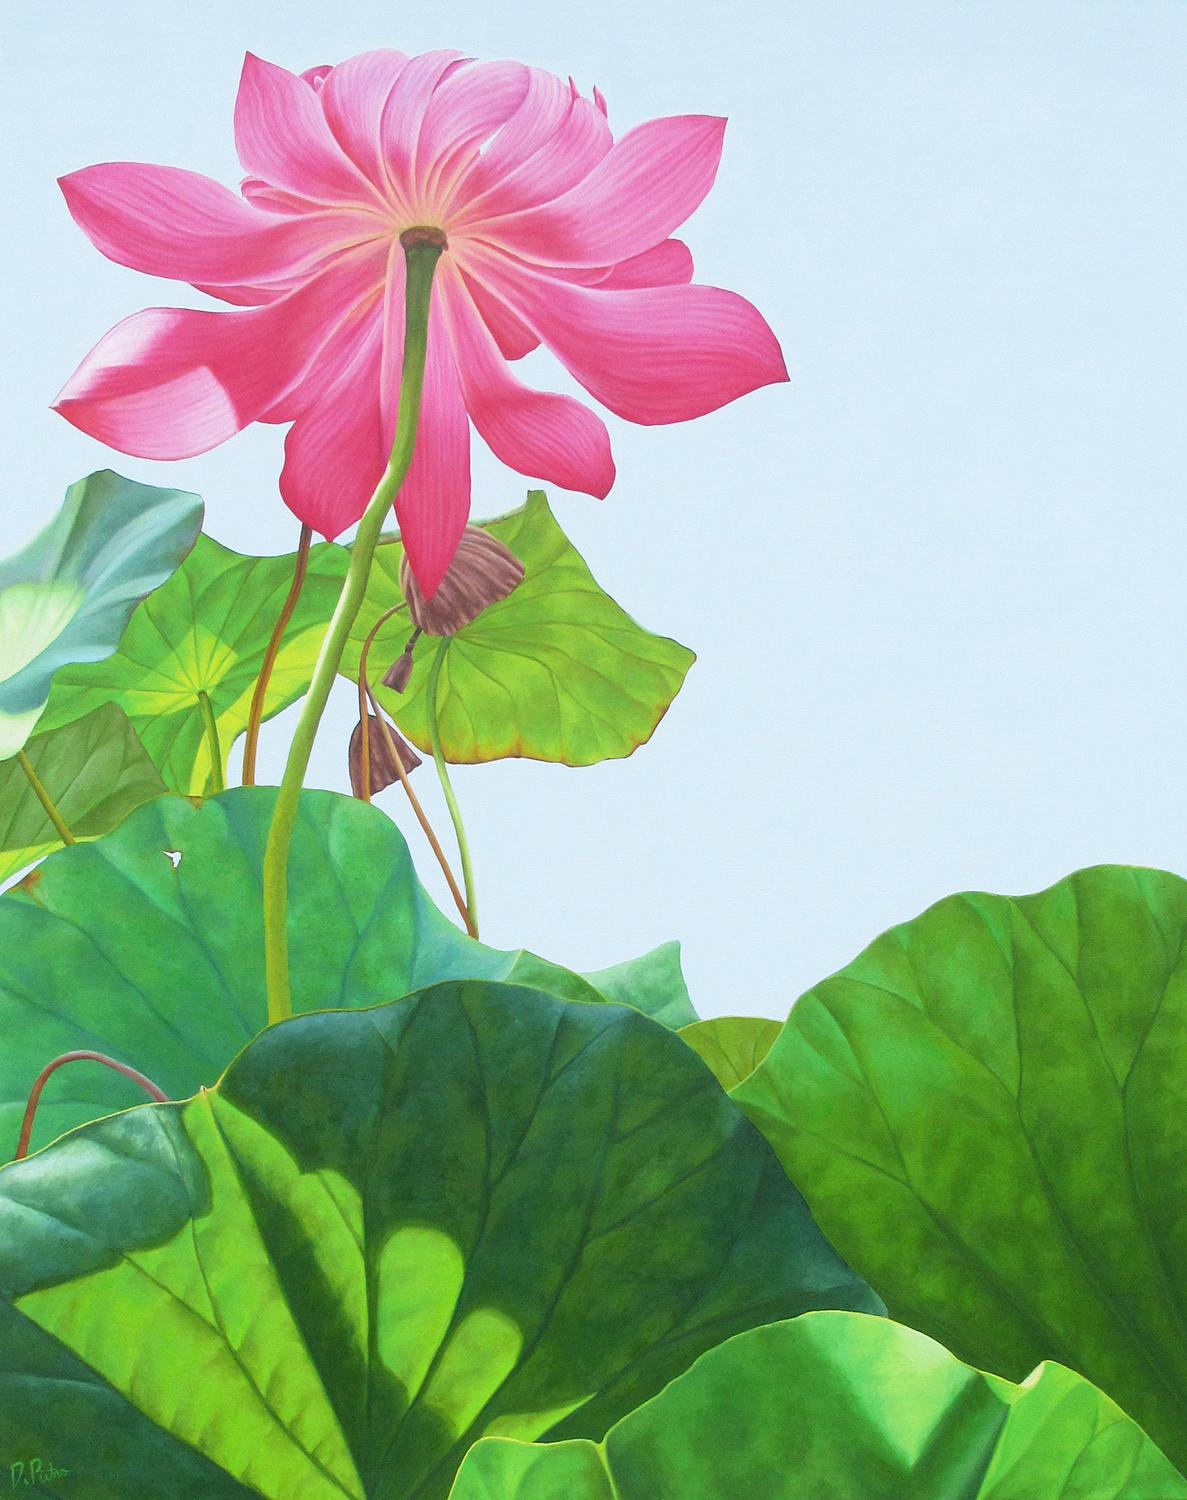 Lotus 25: Photorealist Still Life Painting of Pink Flower & Green Leaves on Blue